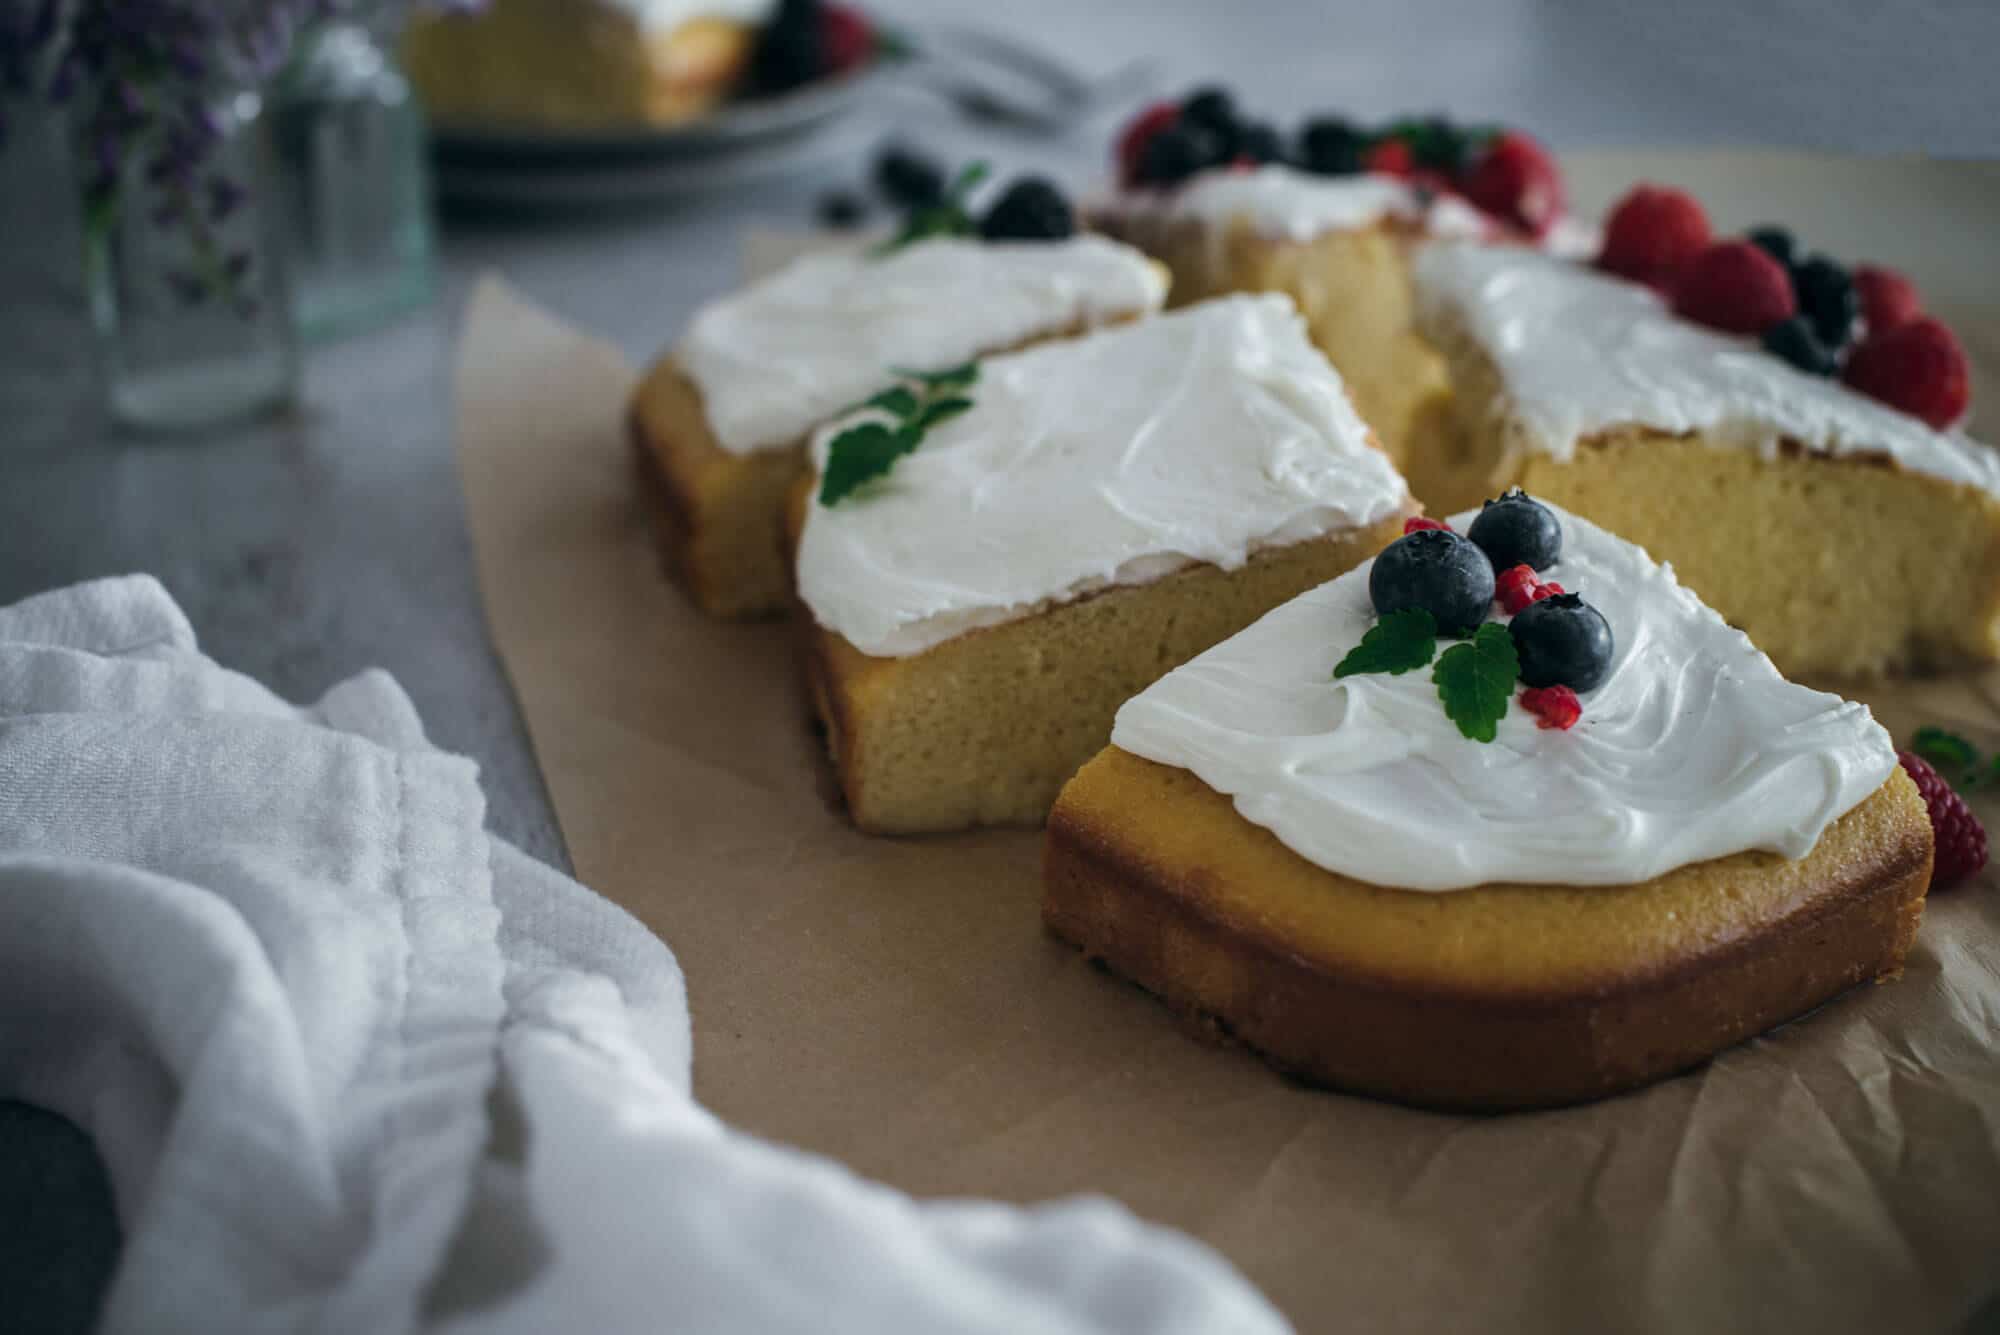 Slices of cake with icing and fruit